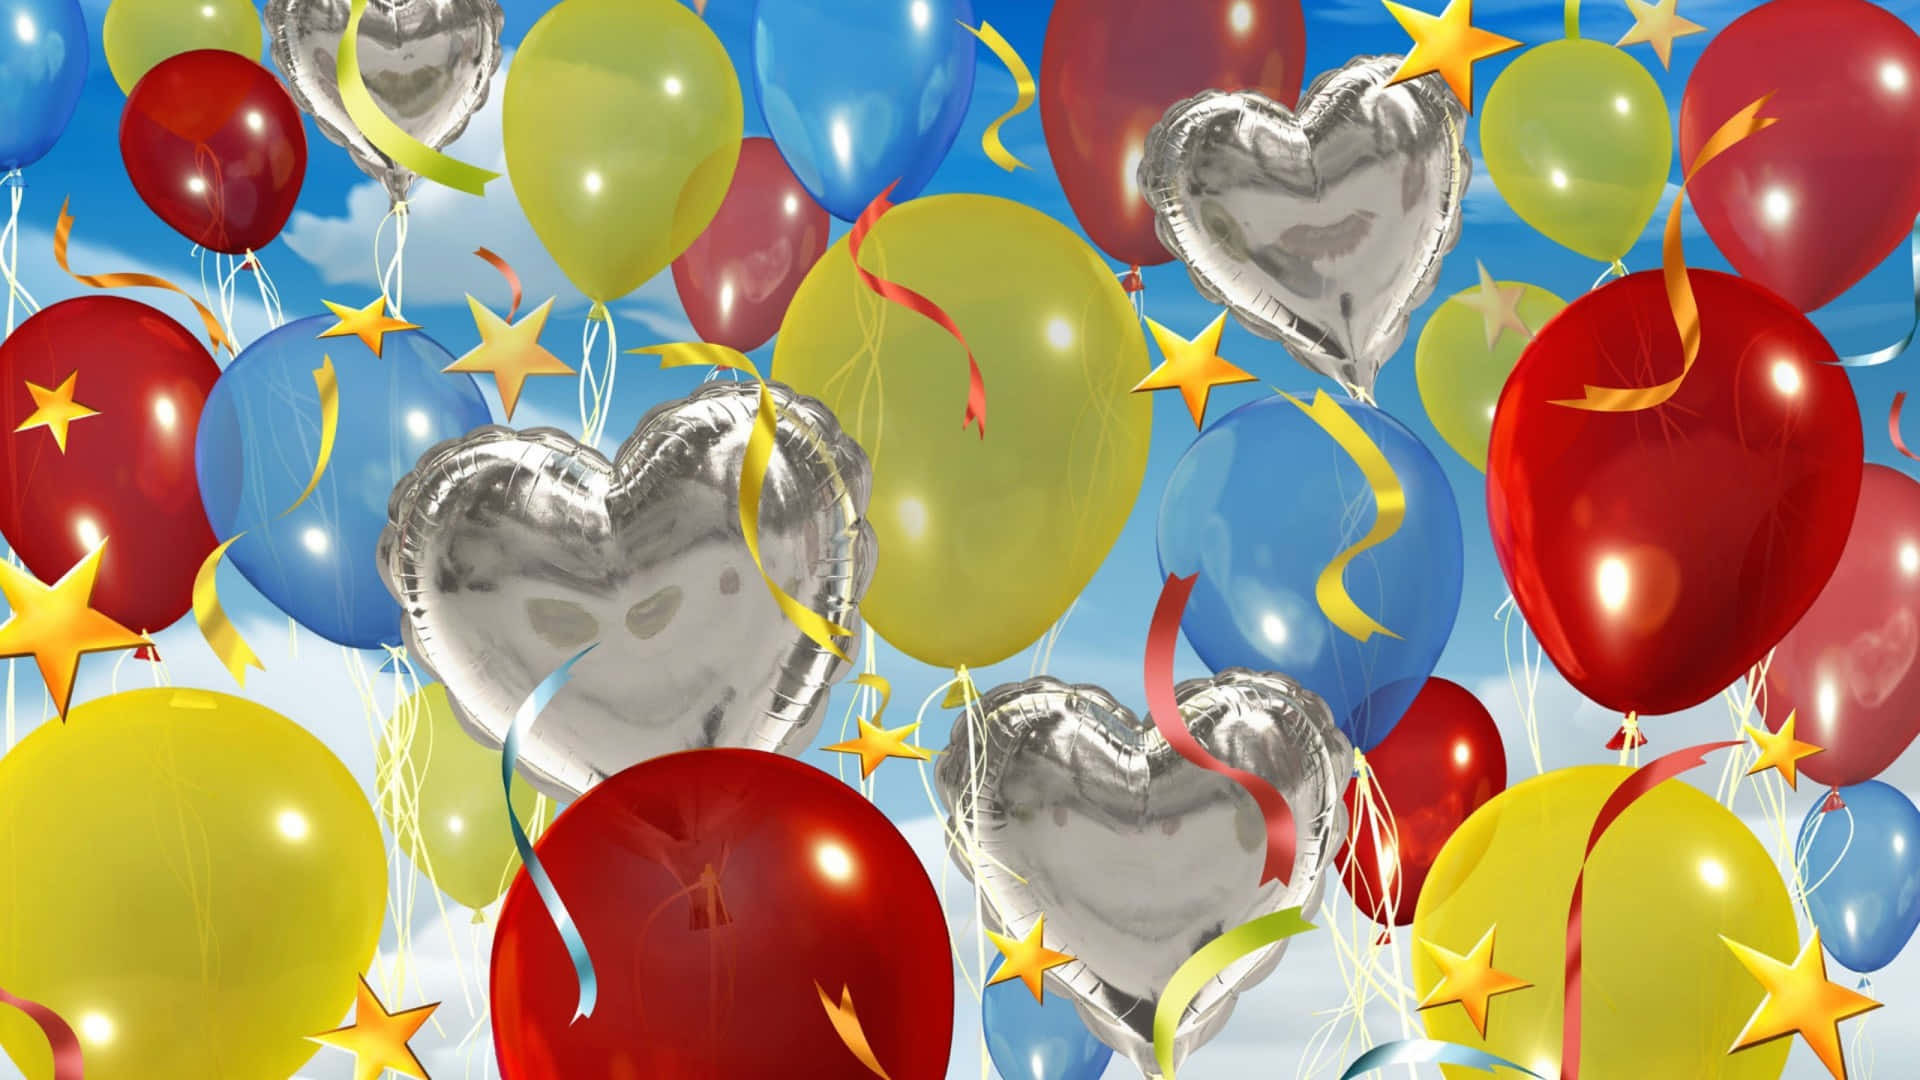 balloons and confetti wallpaper